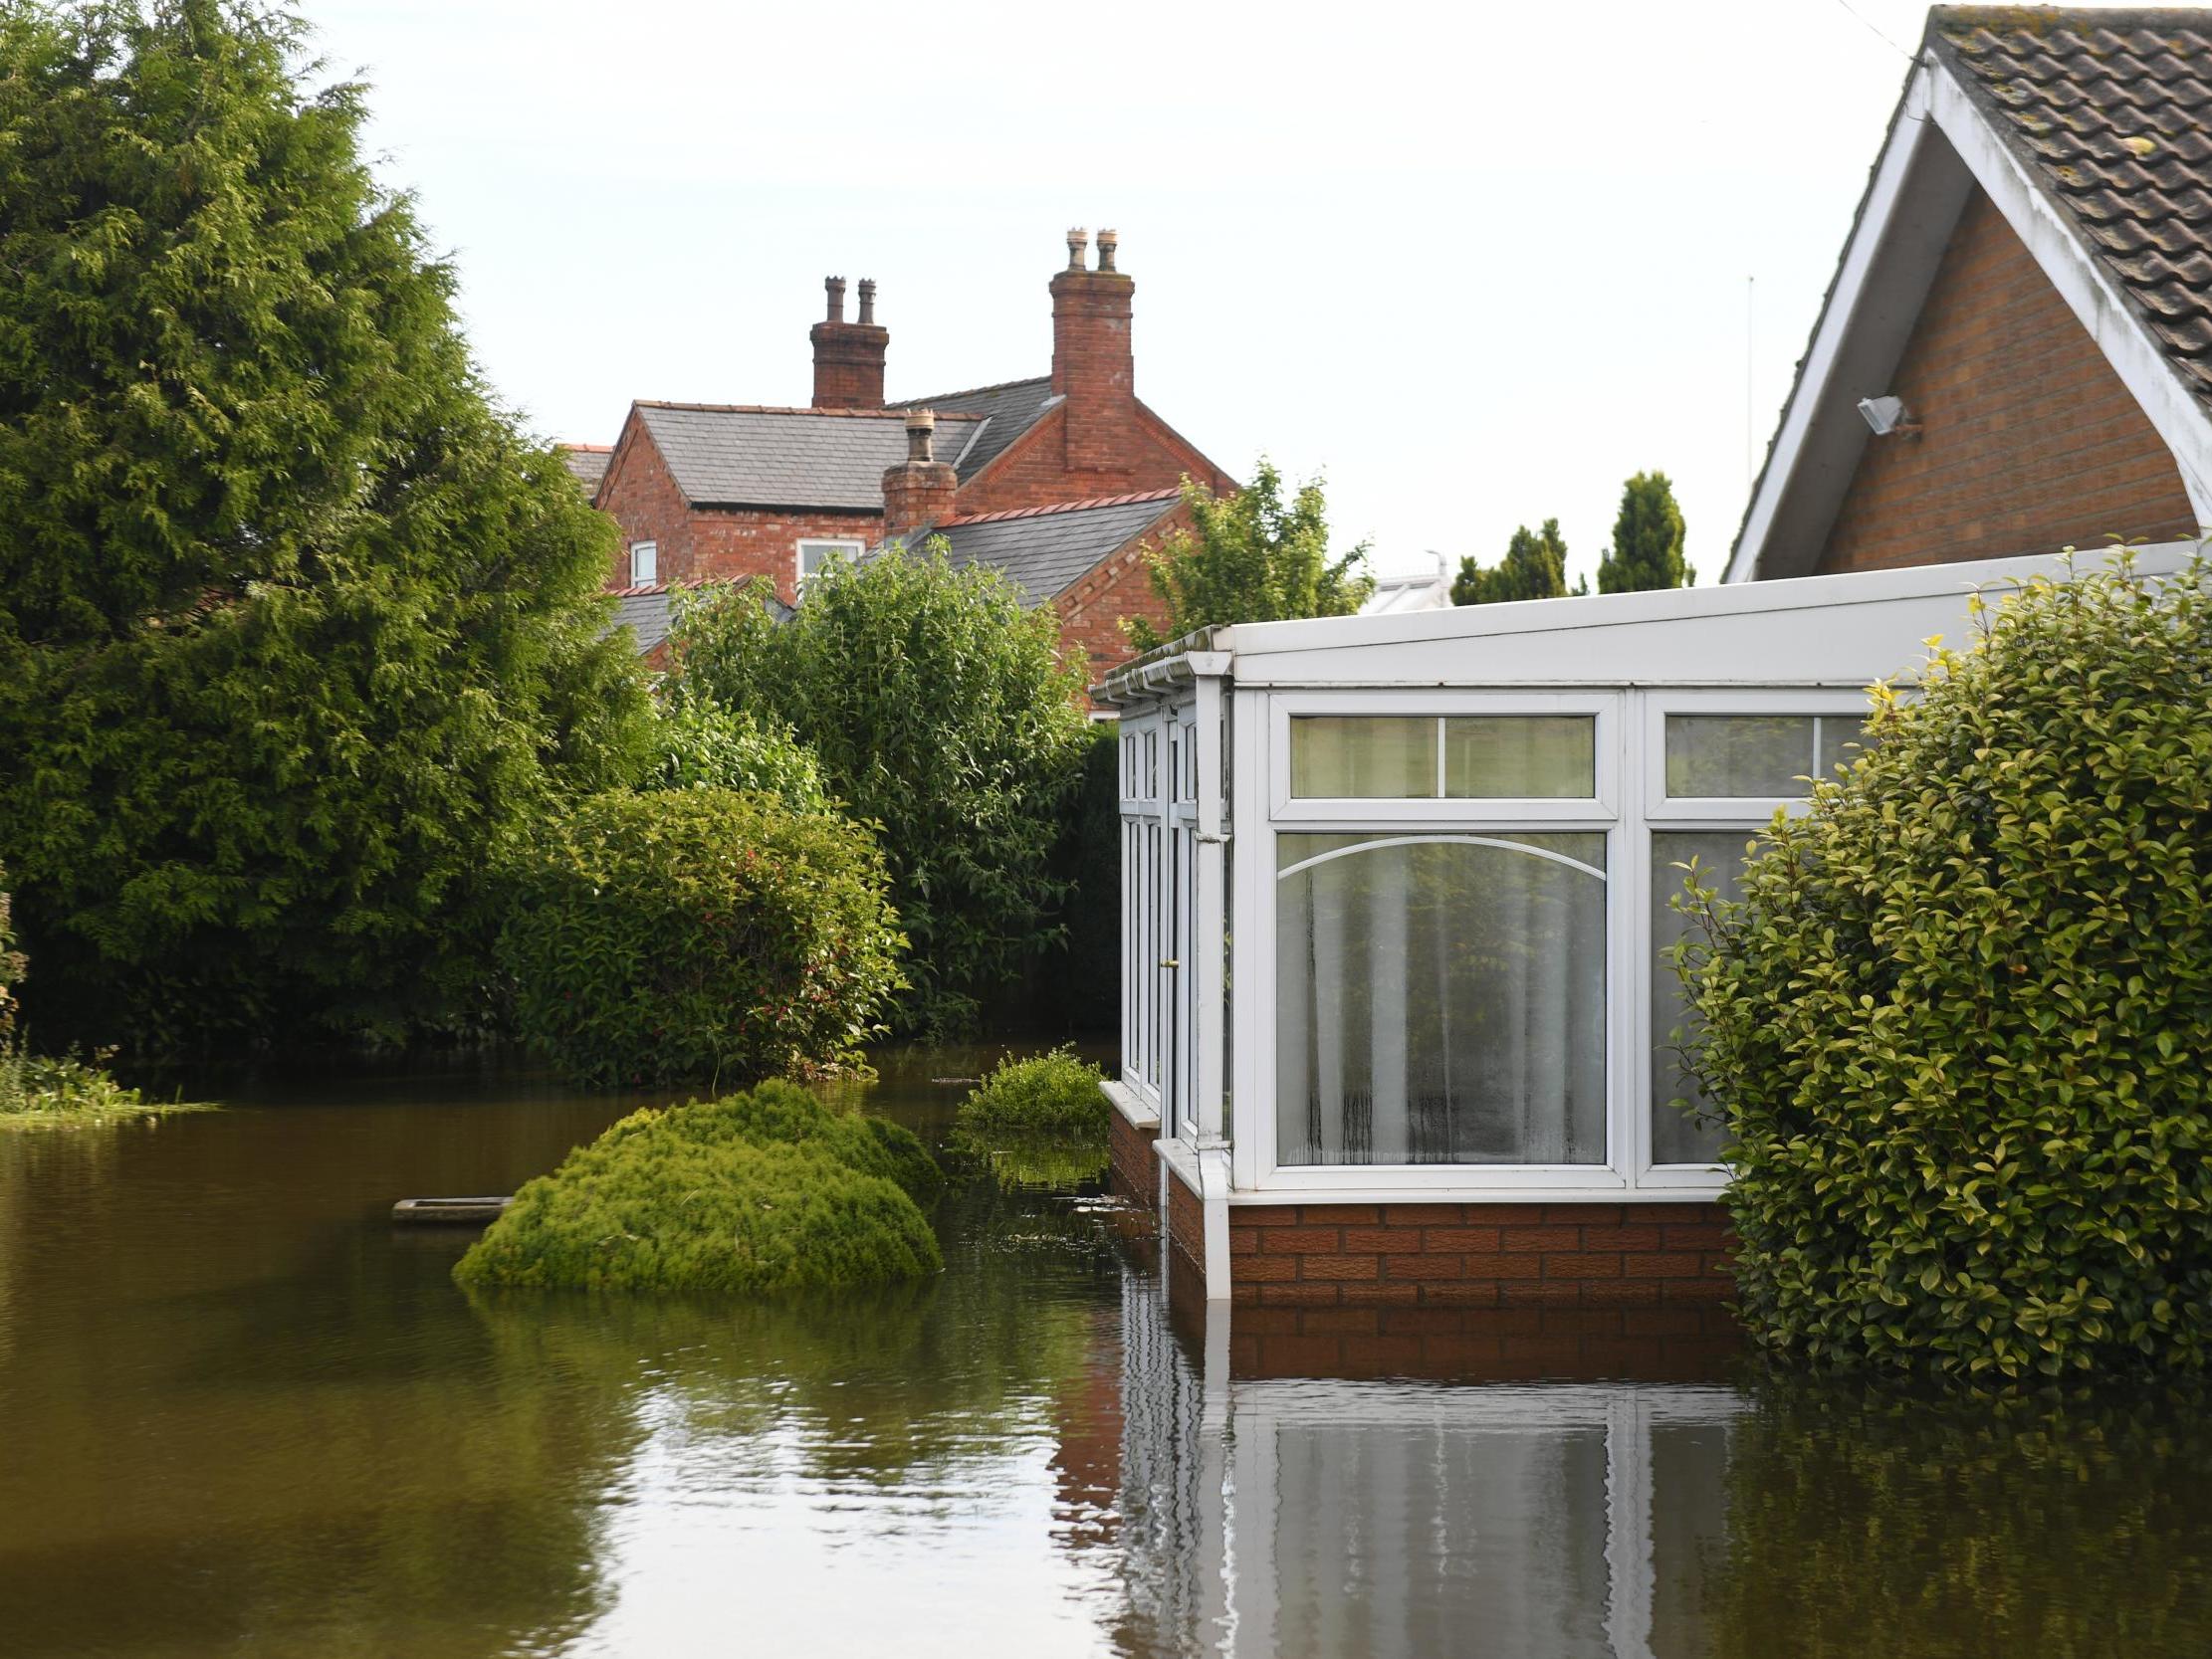 A house surrounded by flood water in Wainfleet, which saw two months’ worth of rain in two days